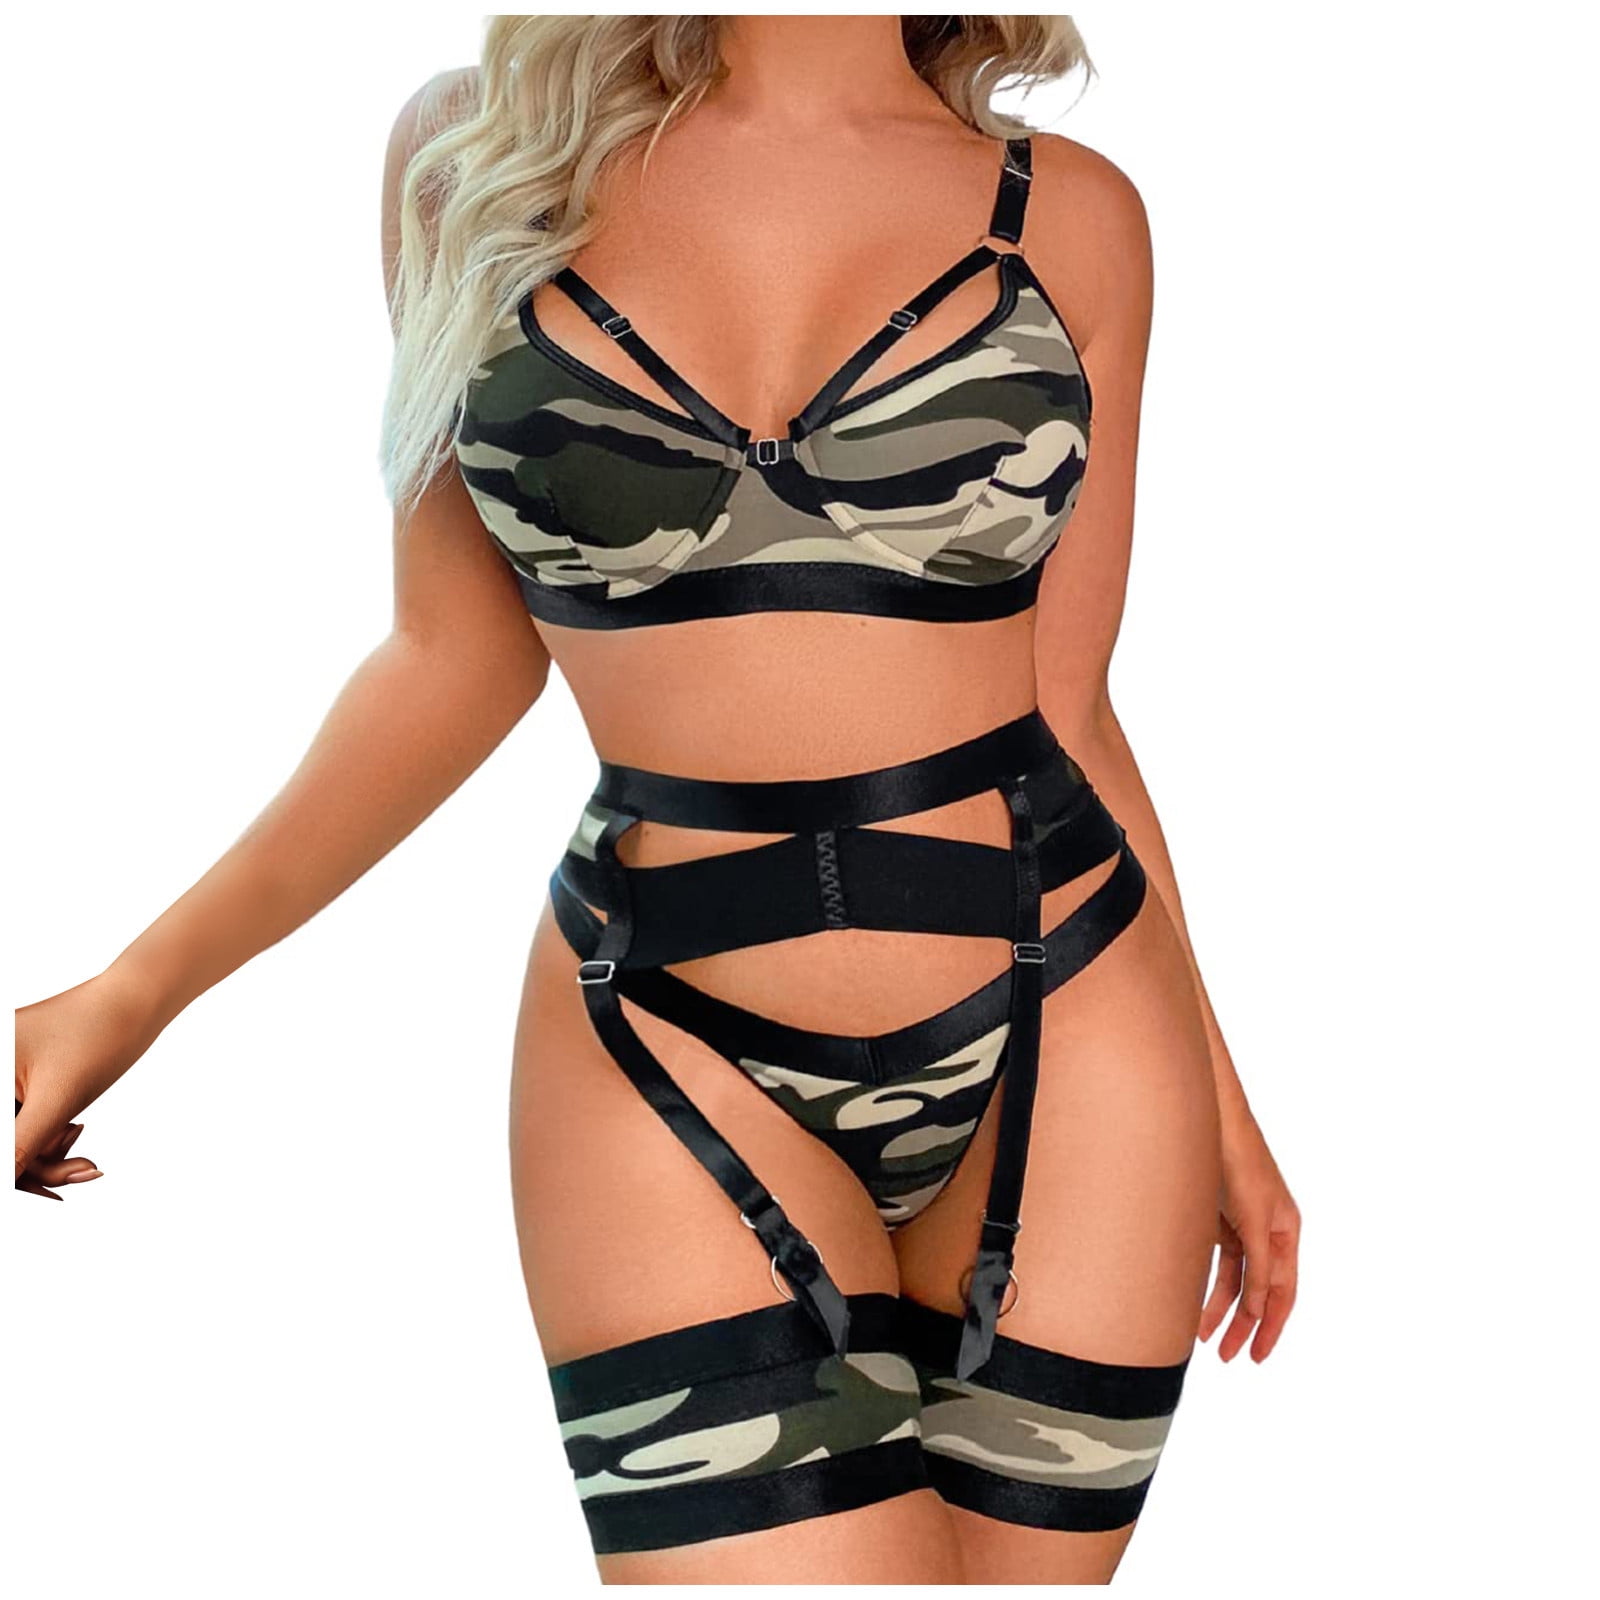 YDKZYMD Sexy Corset Lingerie Set Outfits Womens Sexy 3 Pieces Bra and Panty  Sets with Garter Belt Camouflage Nightgowns for Women Wine S 